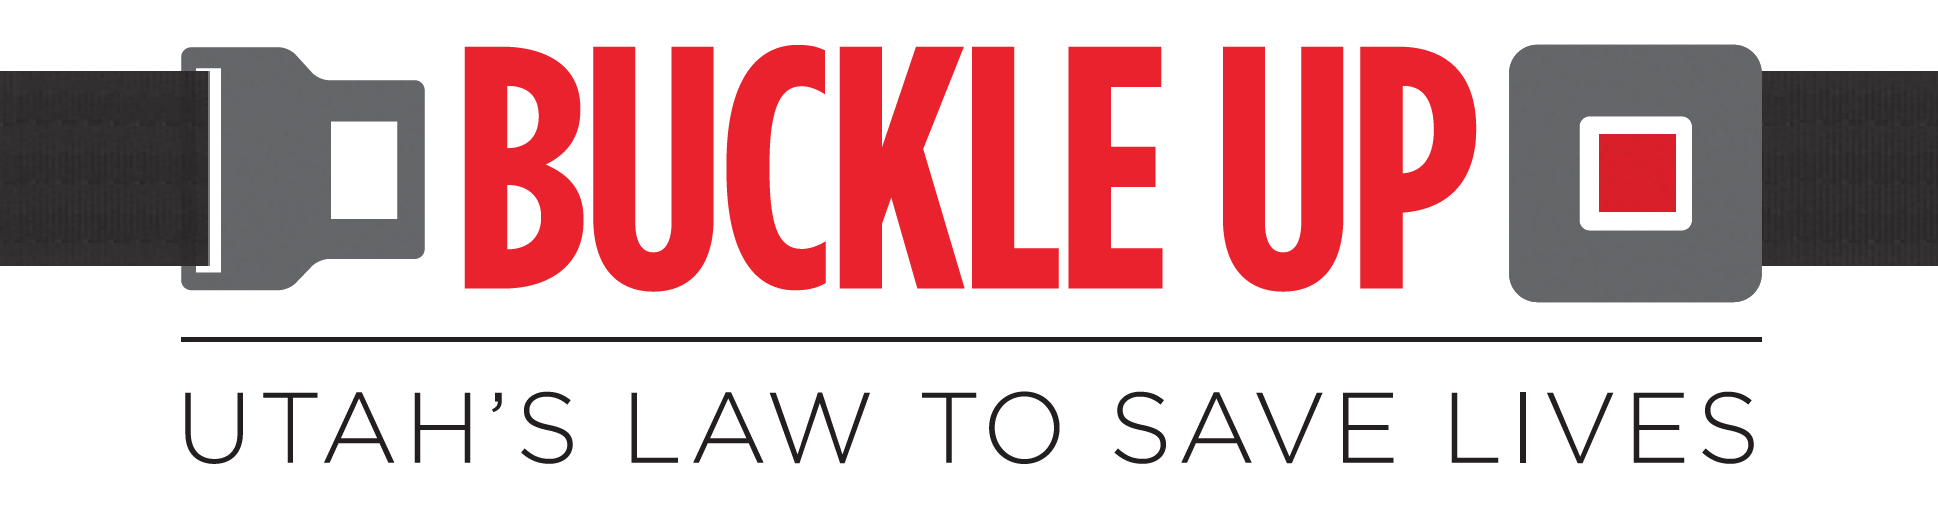 Image that says Buckle Up - Utah's Law to Save Lives